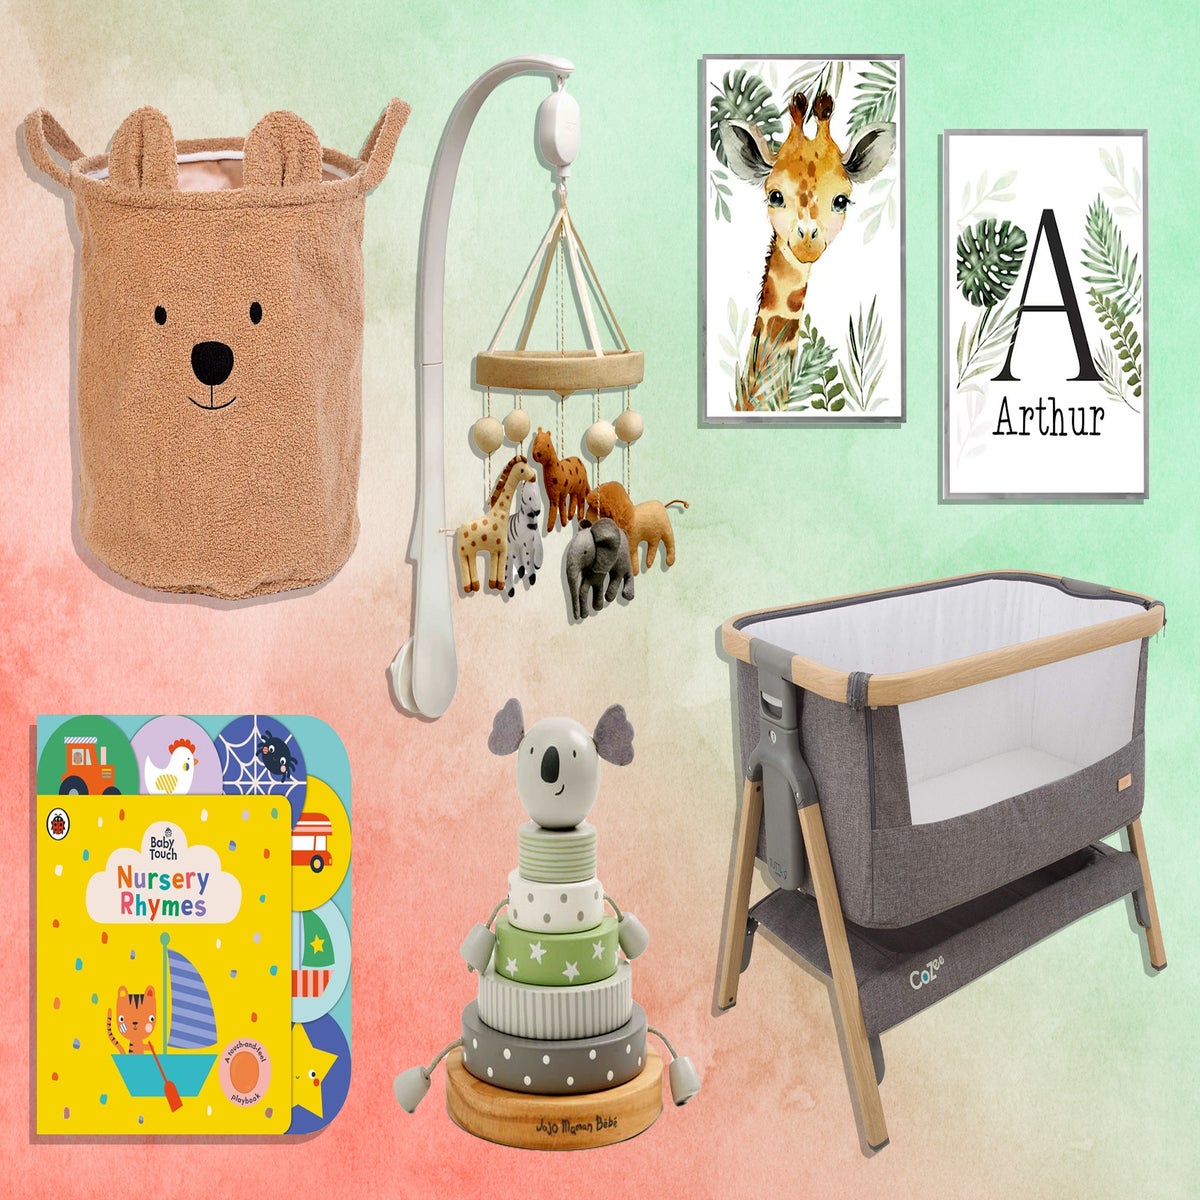 Best nursery furniture and decor ideas for your baby's room in